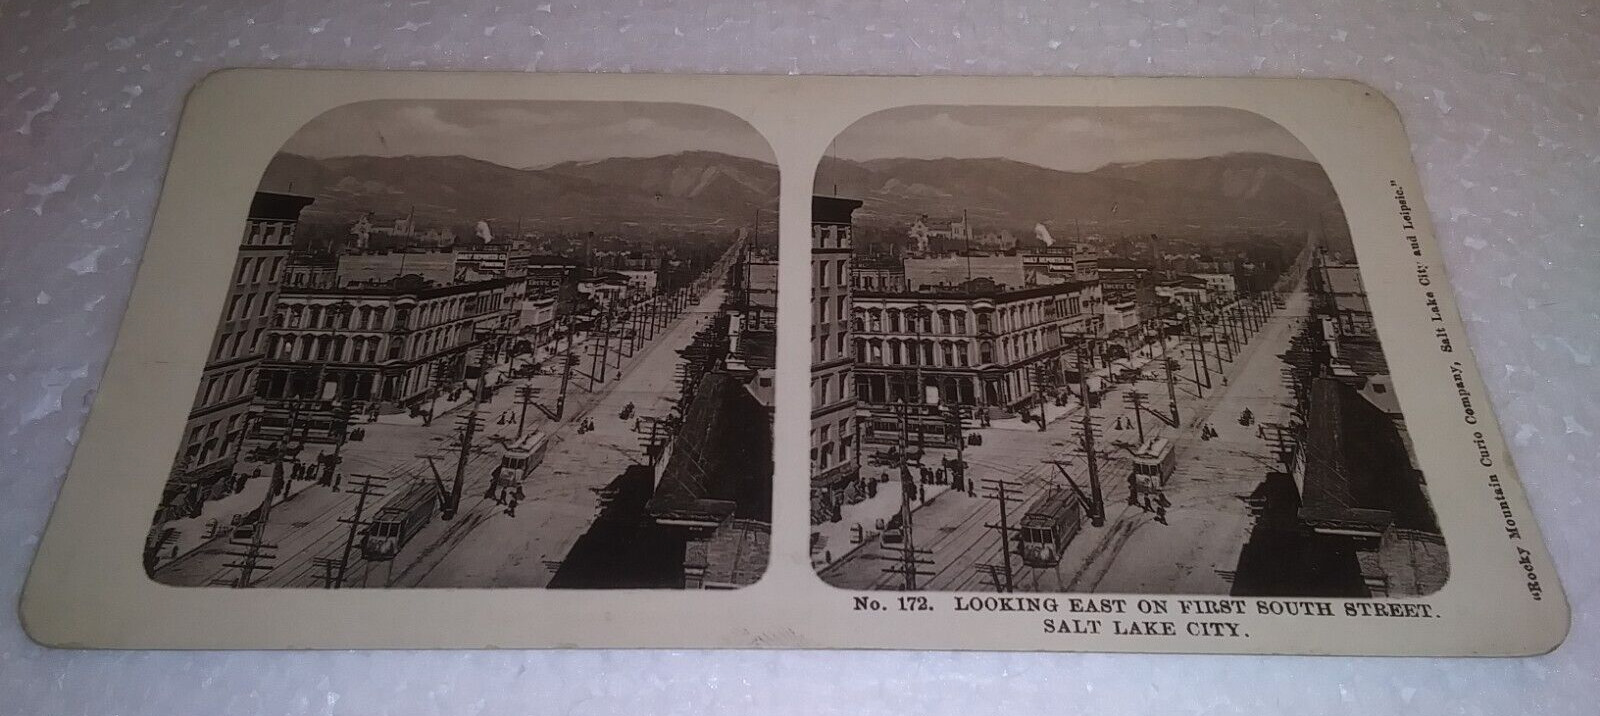 Vintage Looking East On First South Street Salt Lake City Stereoview Card